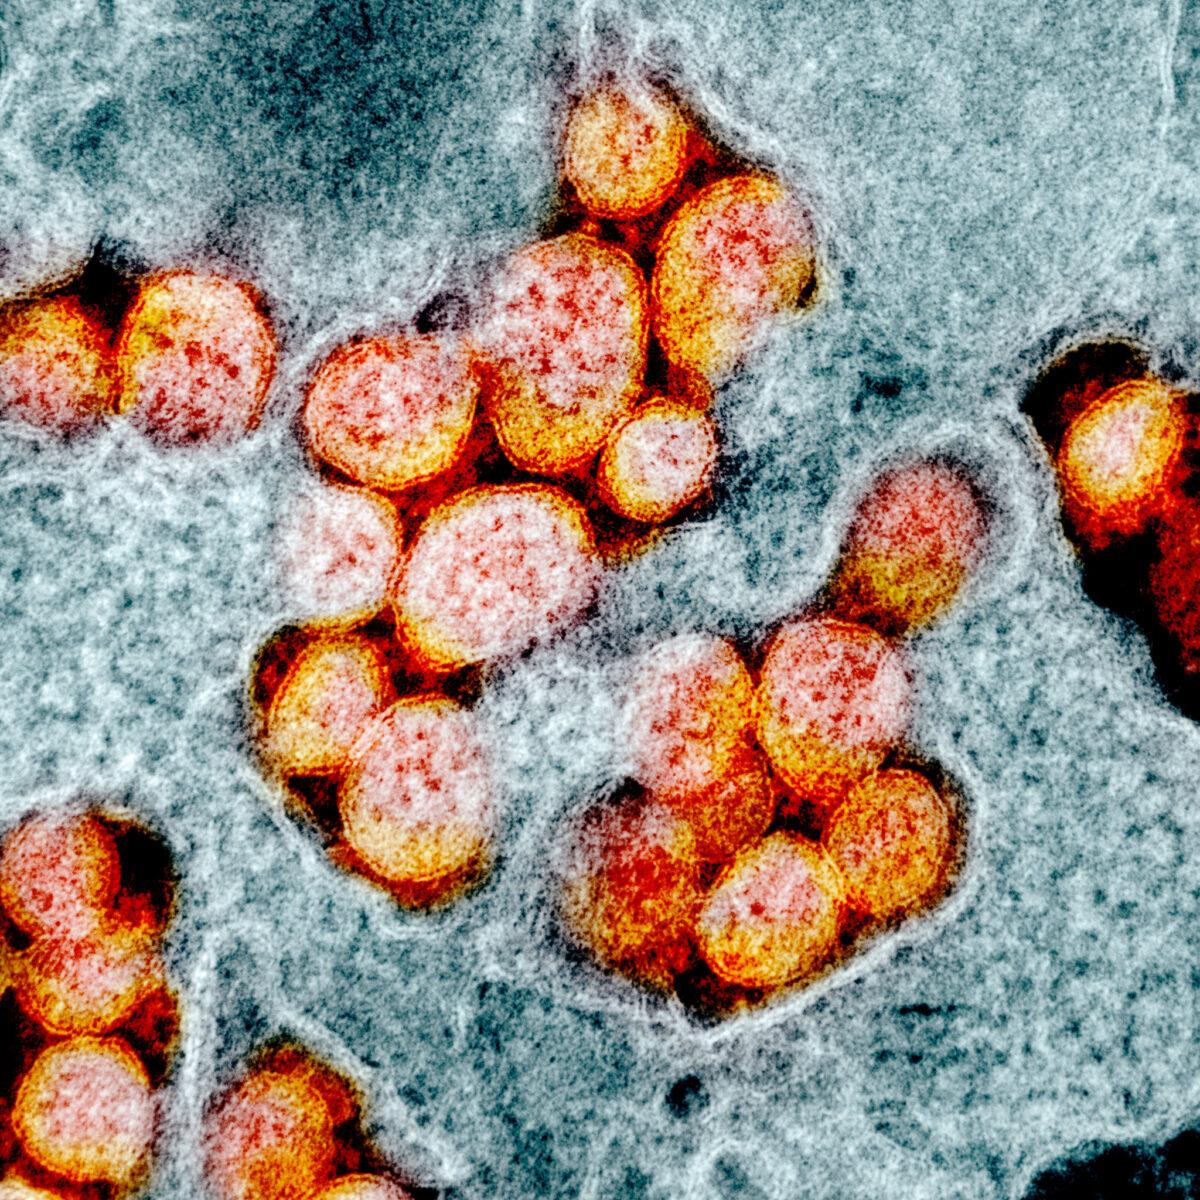 Transmission electron micrograph of SARS-CoV-2 virus particles, which The Epoch Times refers to as the CCP virus, isolated from a patient. (NIAID)